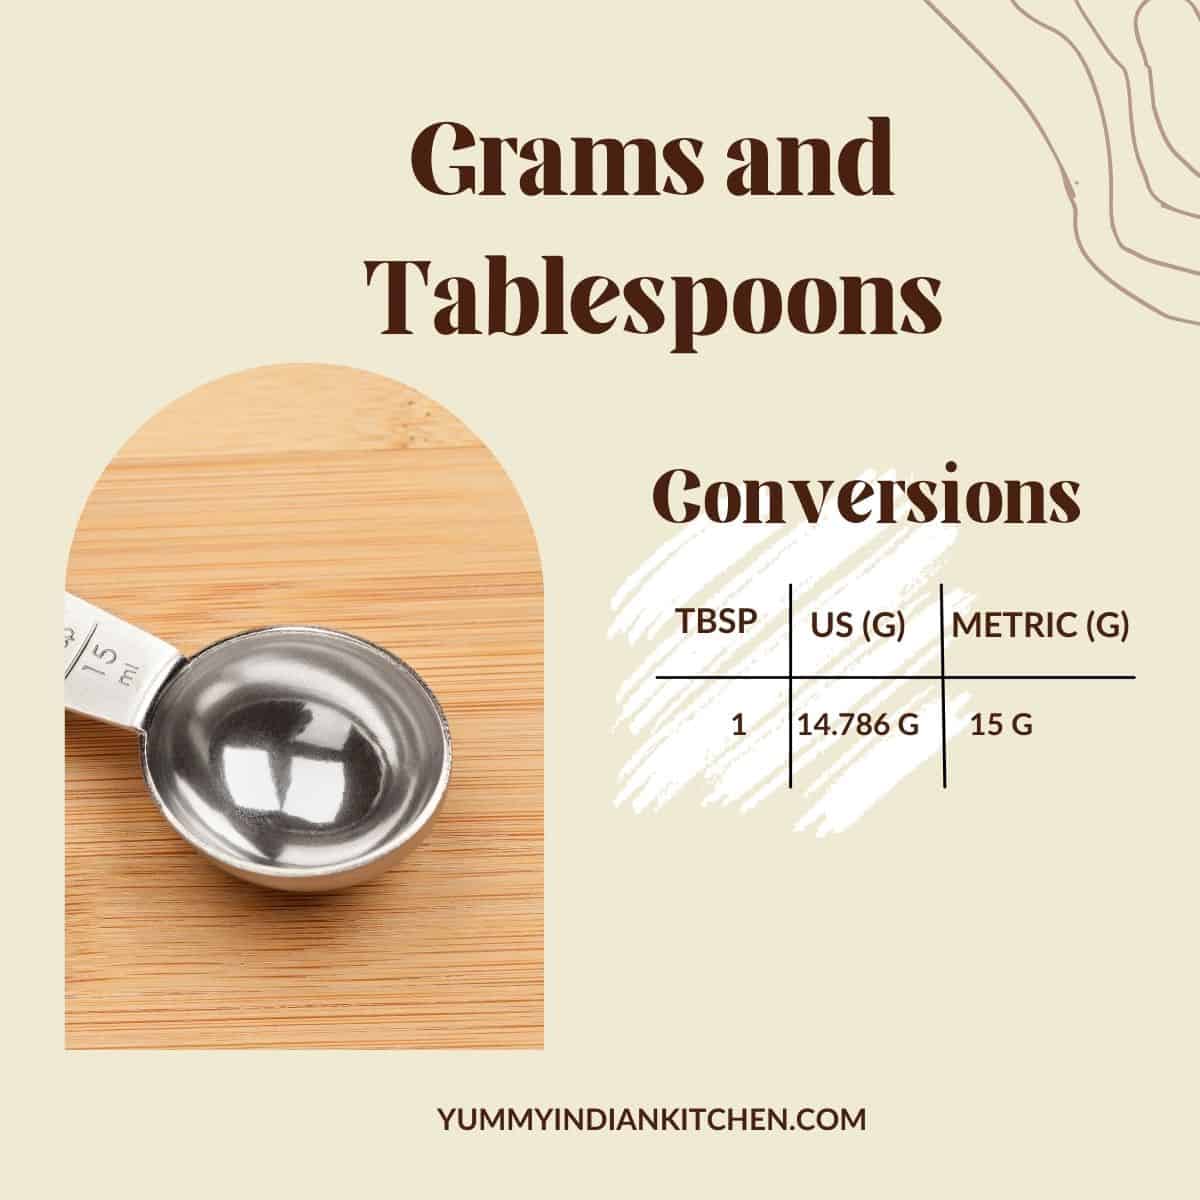 Conversion chart with text to show how many grams in a tablespoon